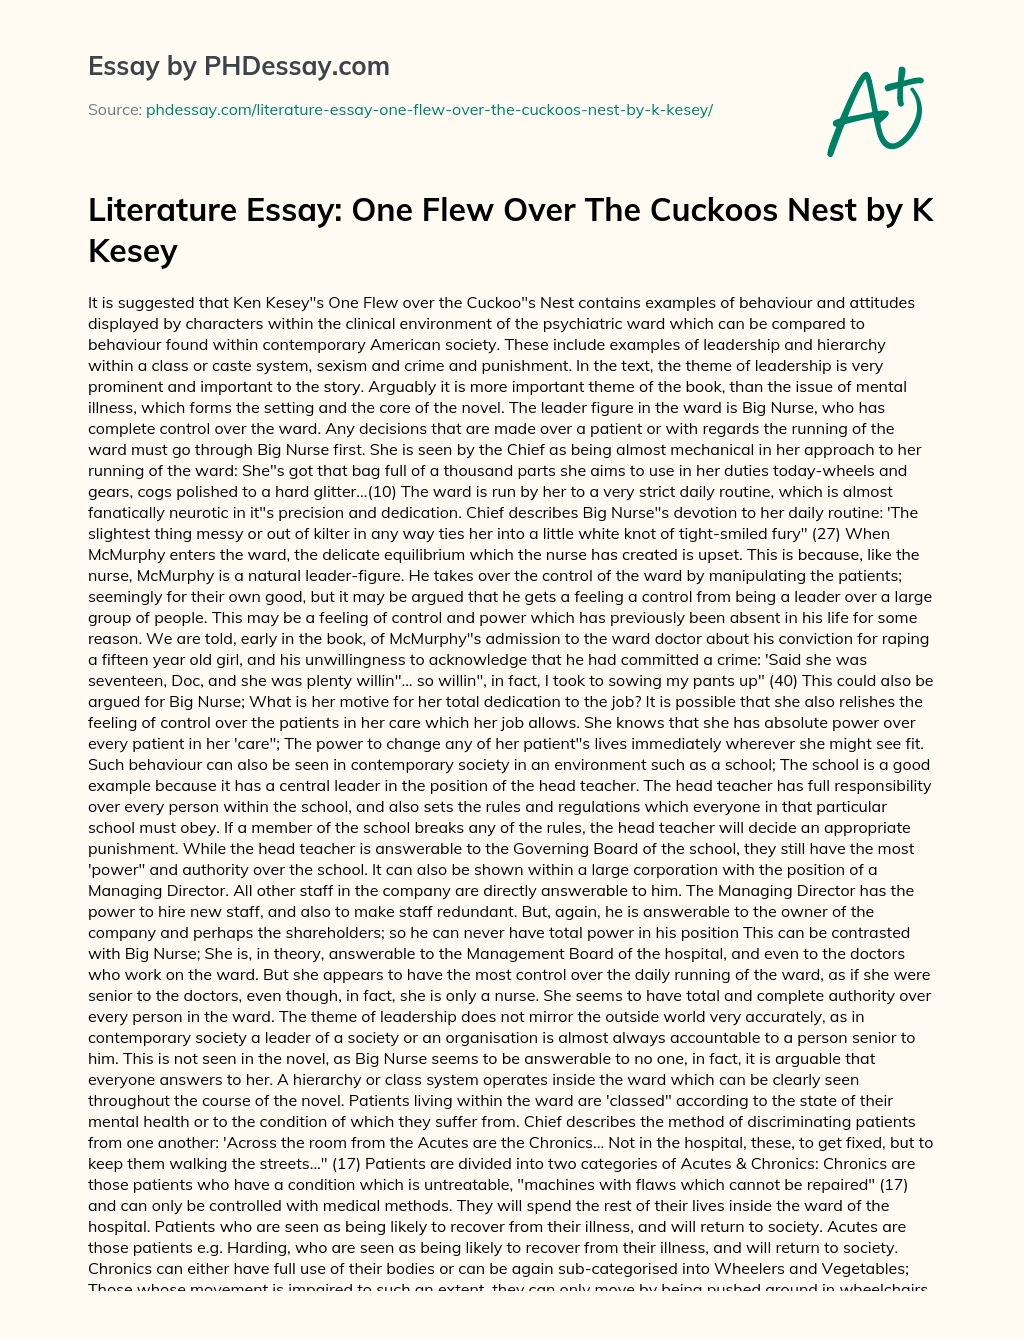 Literature Essay: One Flew Over The Cuckoos Nest by K Kesey essay